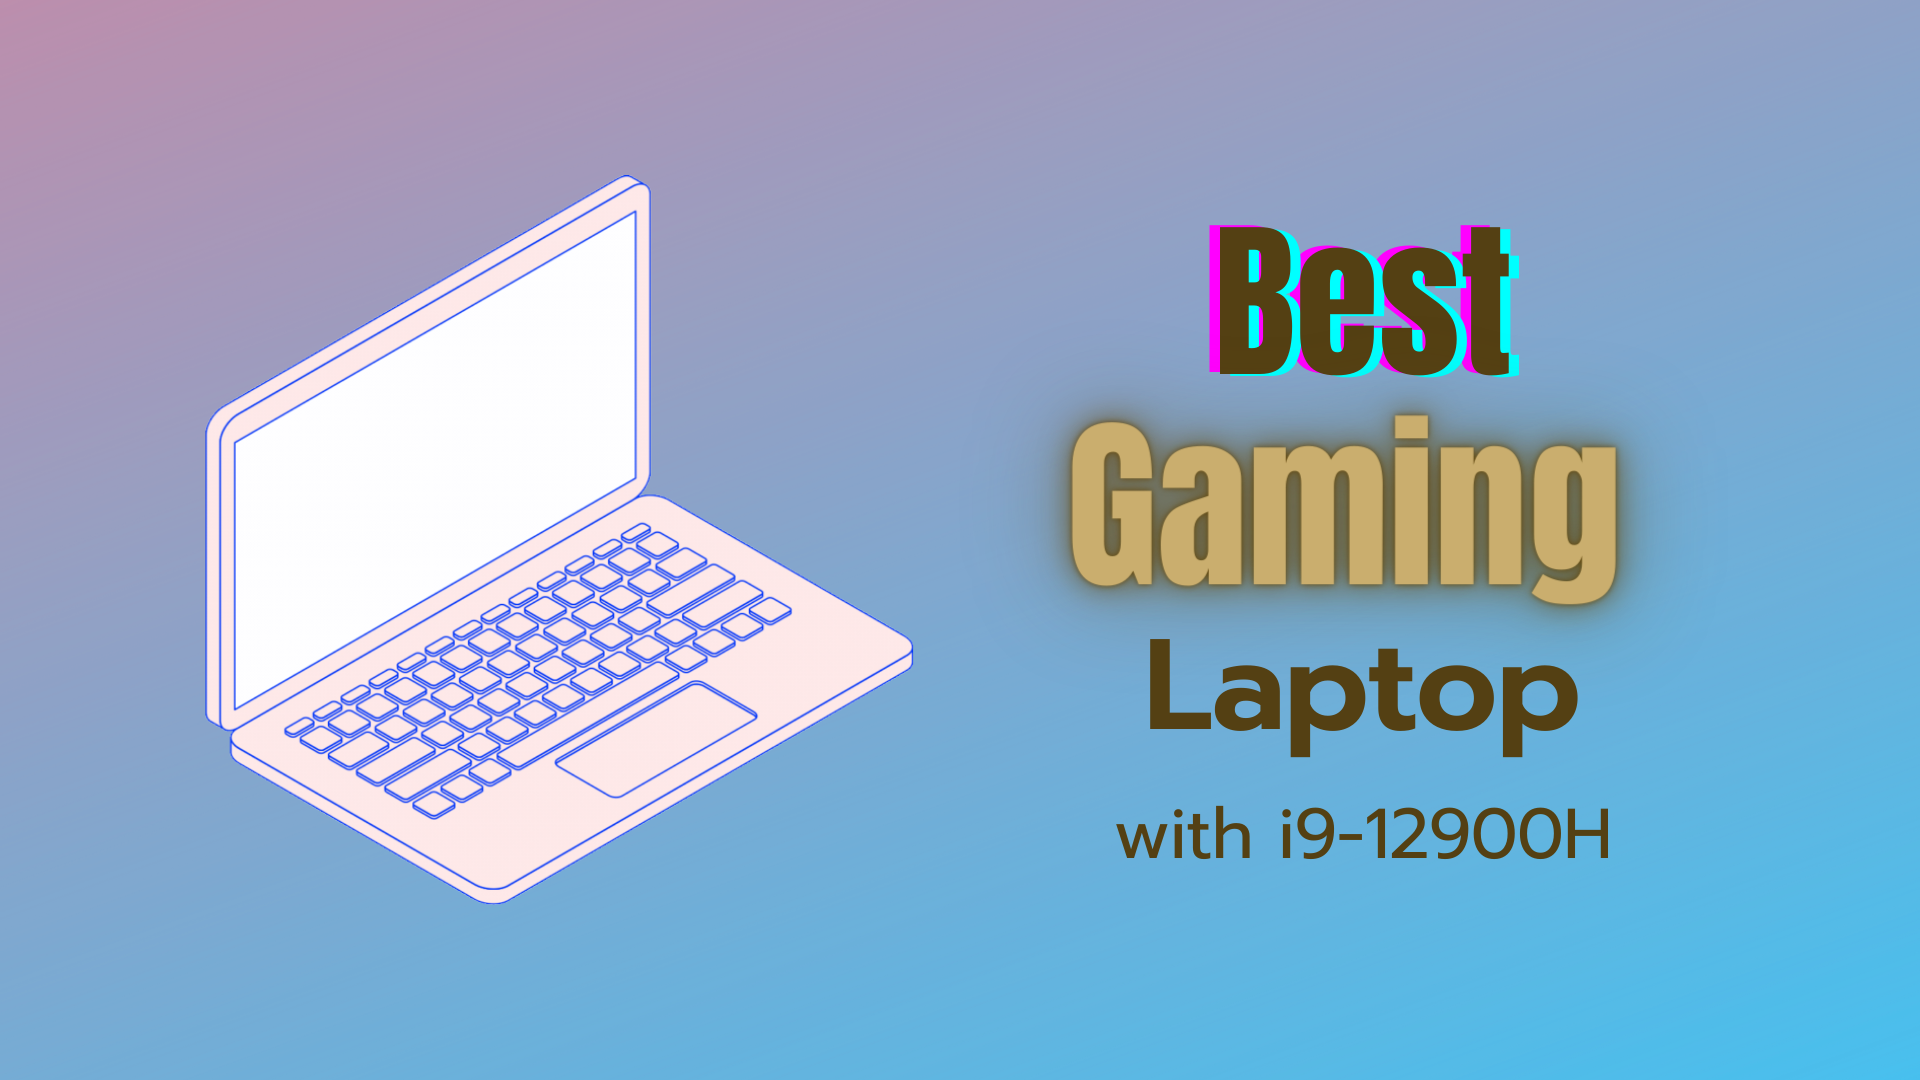 Gaming Laptops with Intel Core i9-12900H Processor in India